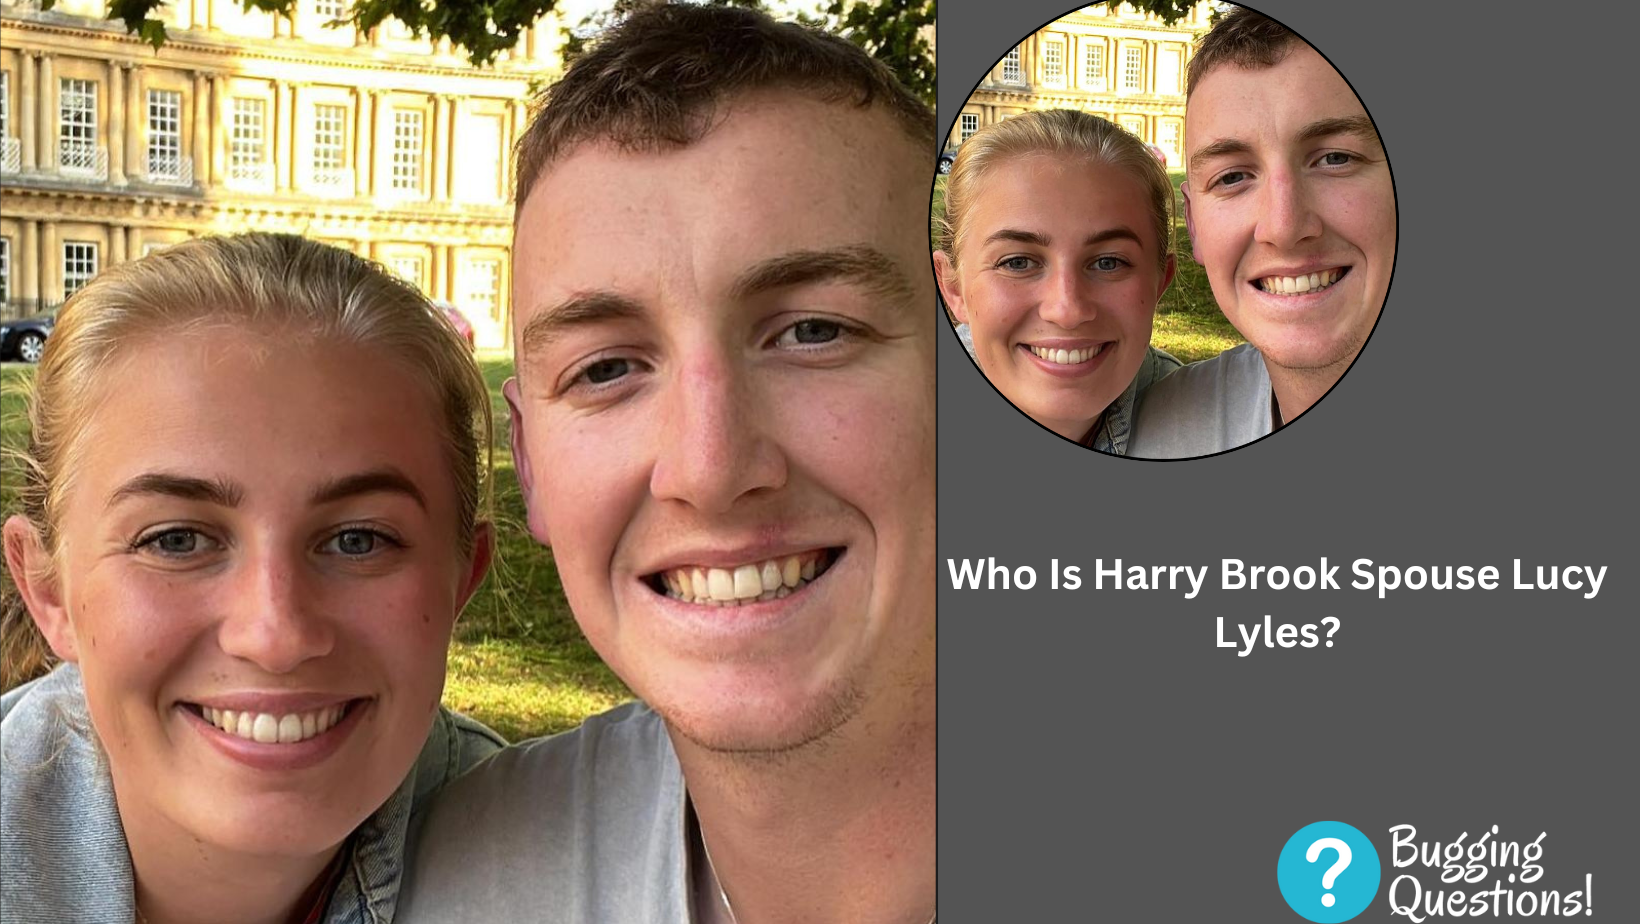 Who Is Harry Brook Spouse Lucy Lyles?